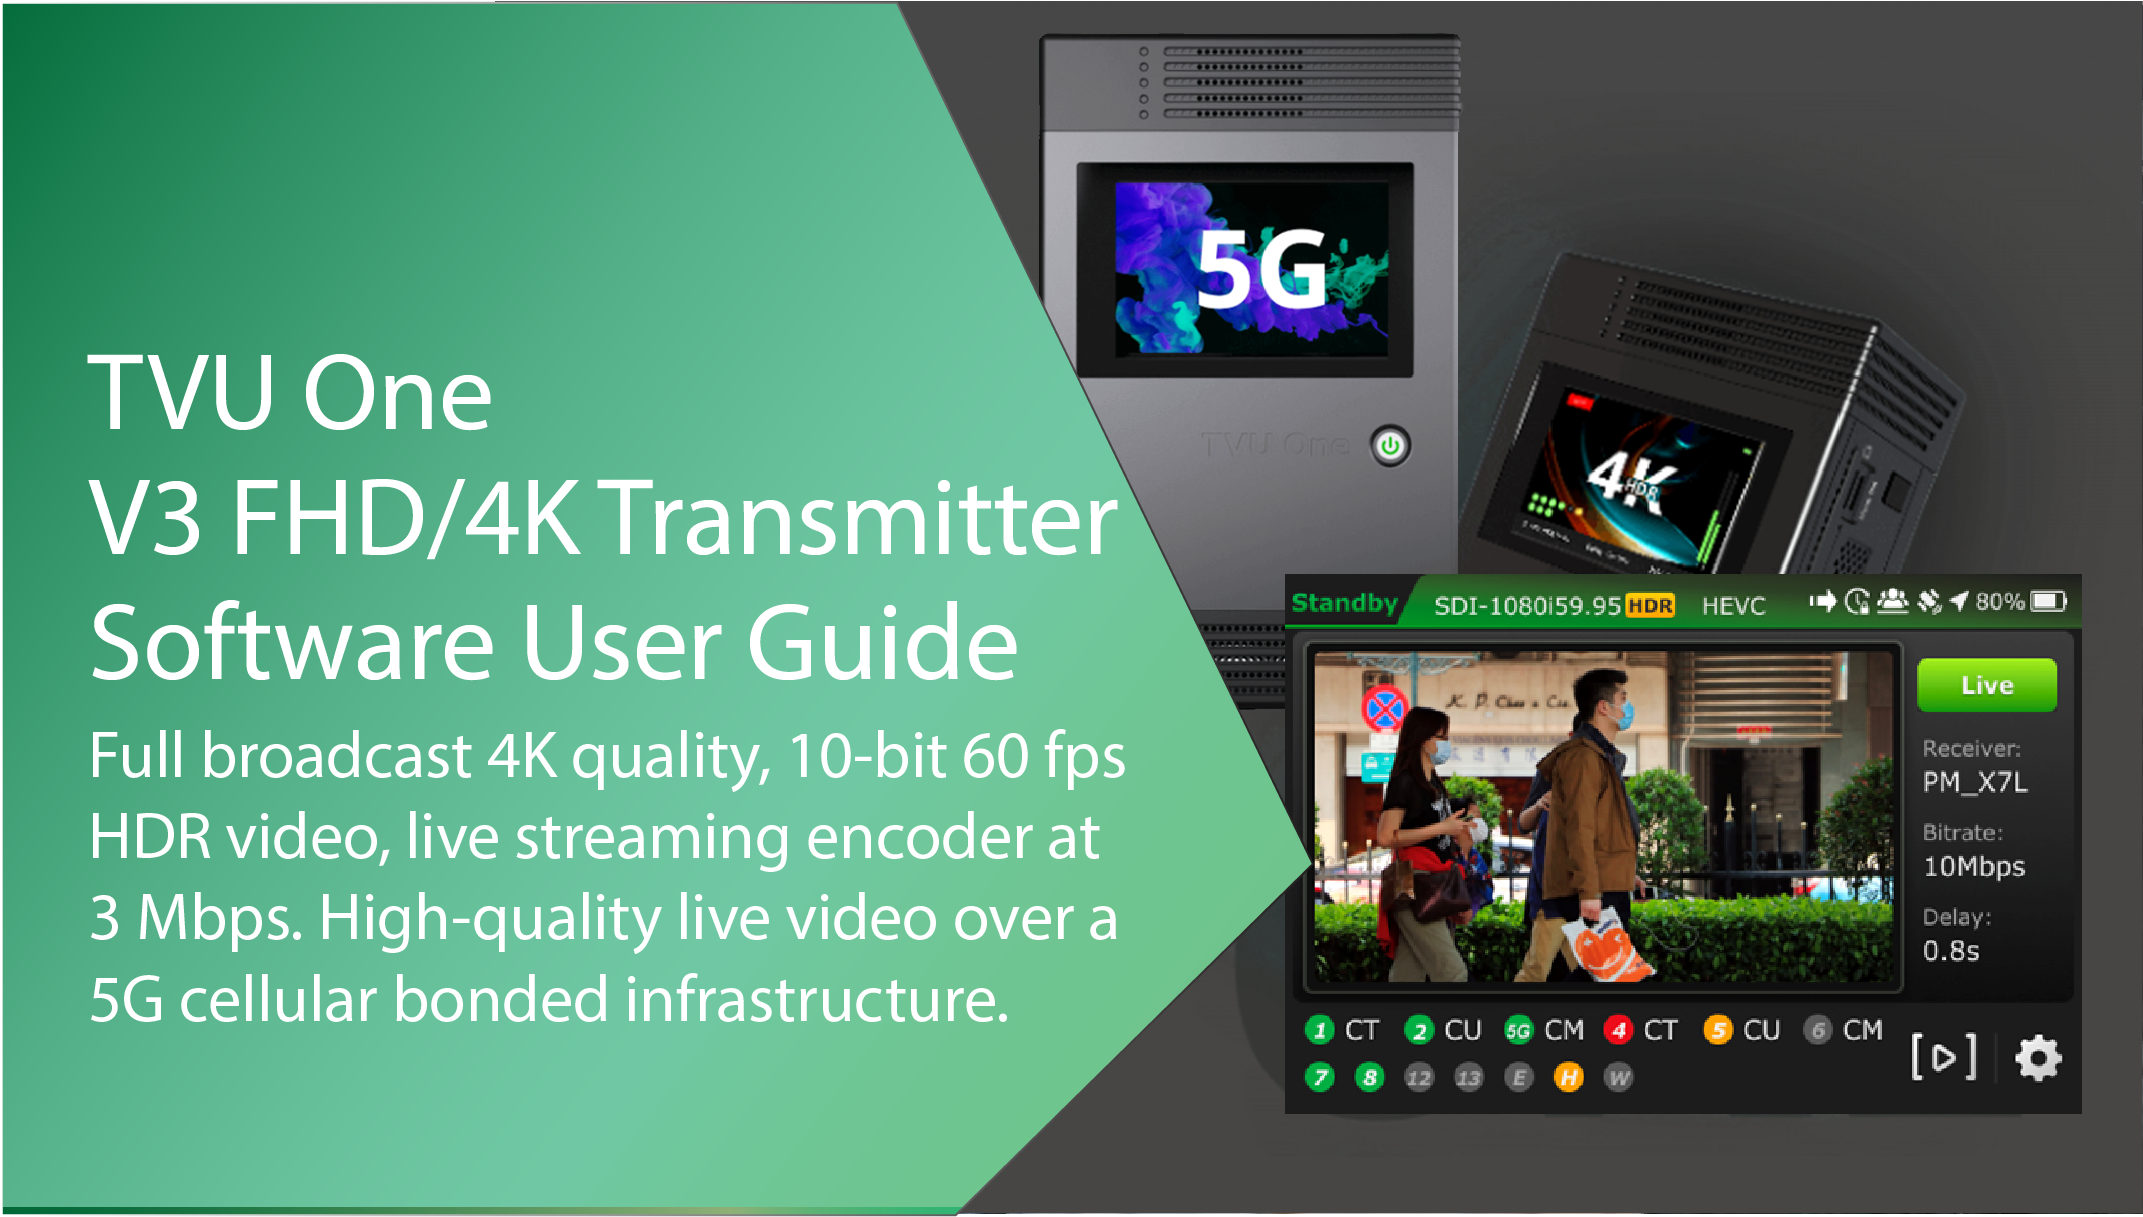 TVU One FHD and 4K transmitter featured inage Post